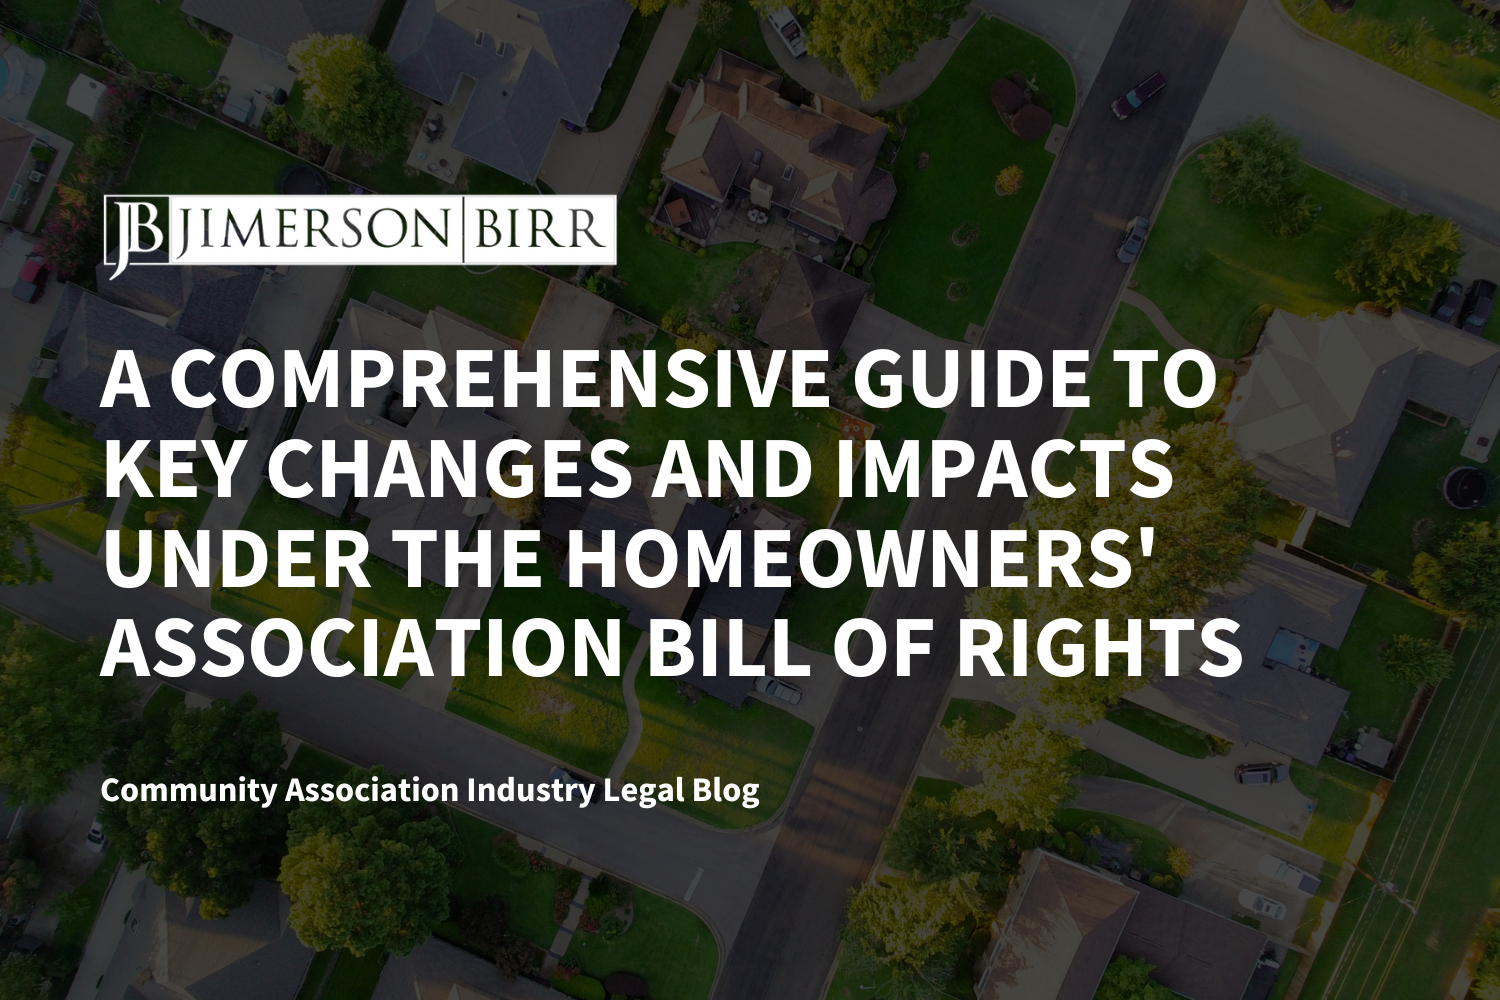 A Comprehensive Guide to Key Changes and Impacts Under the Homeowners’ Association Bill of Rights